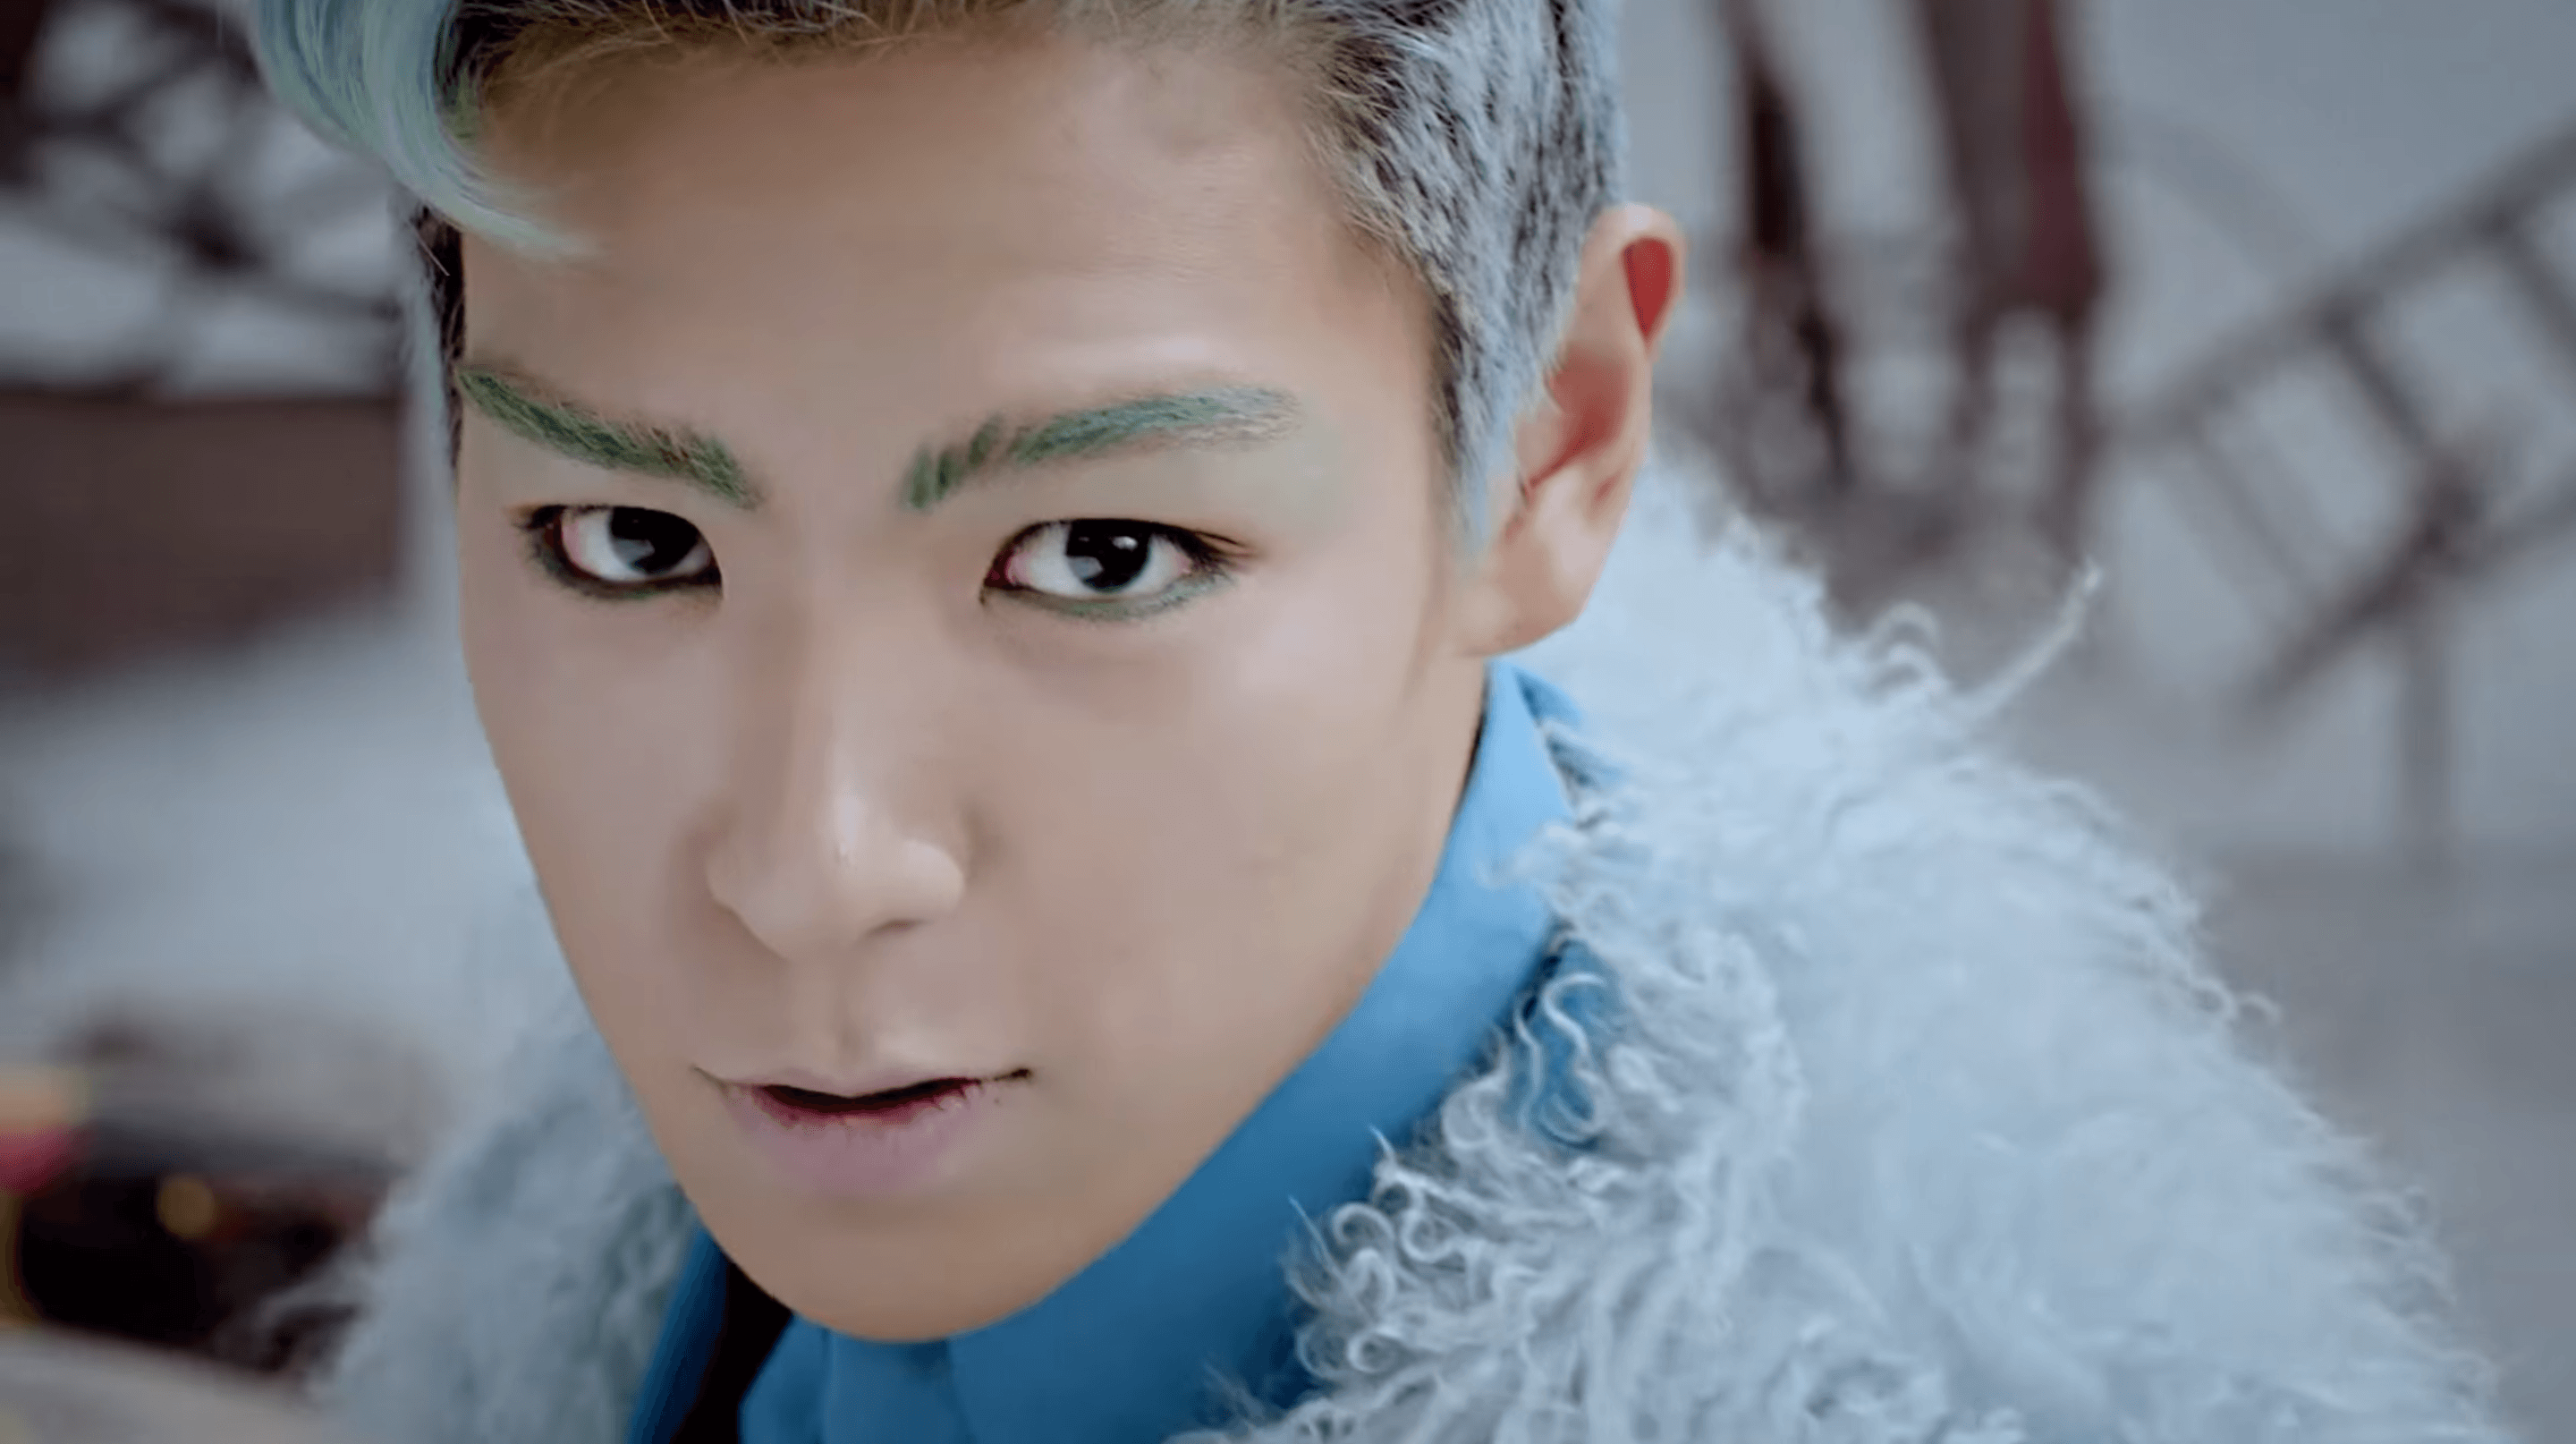 This iconic blue brow won the hearts of many during "Fantastic Baby".